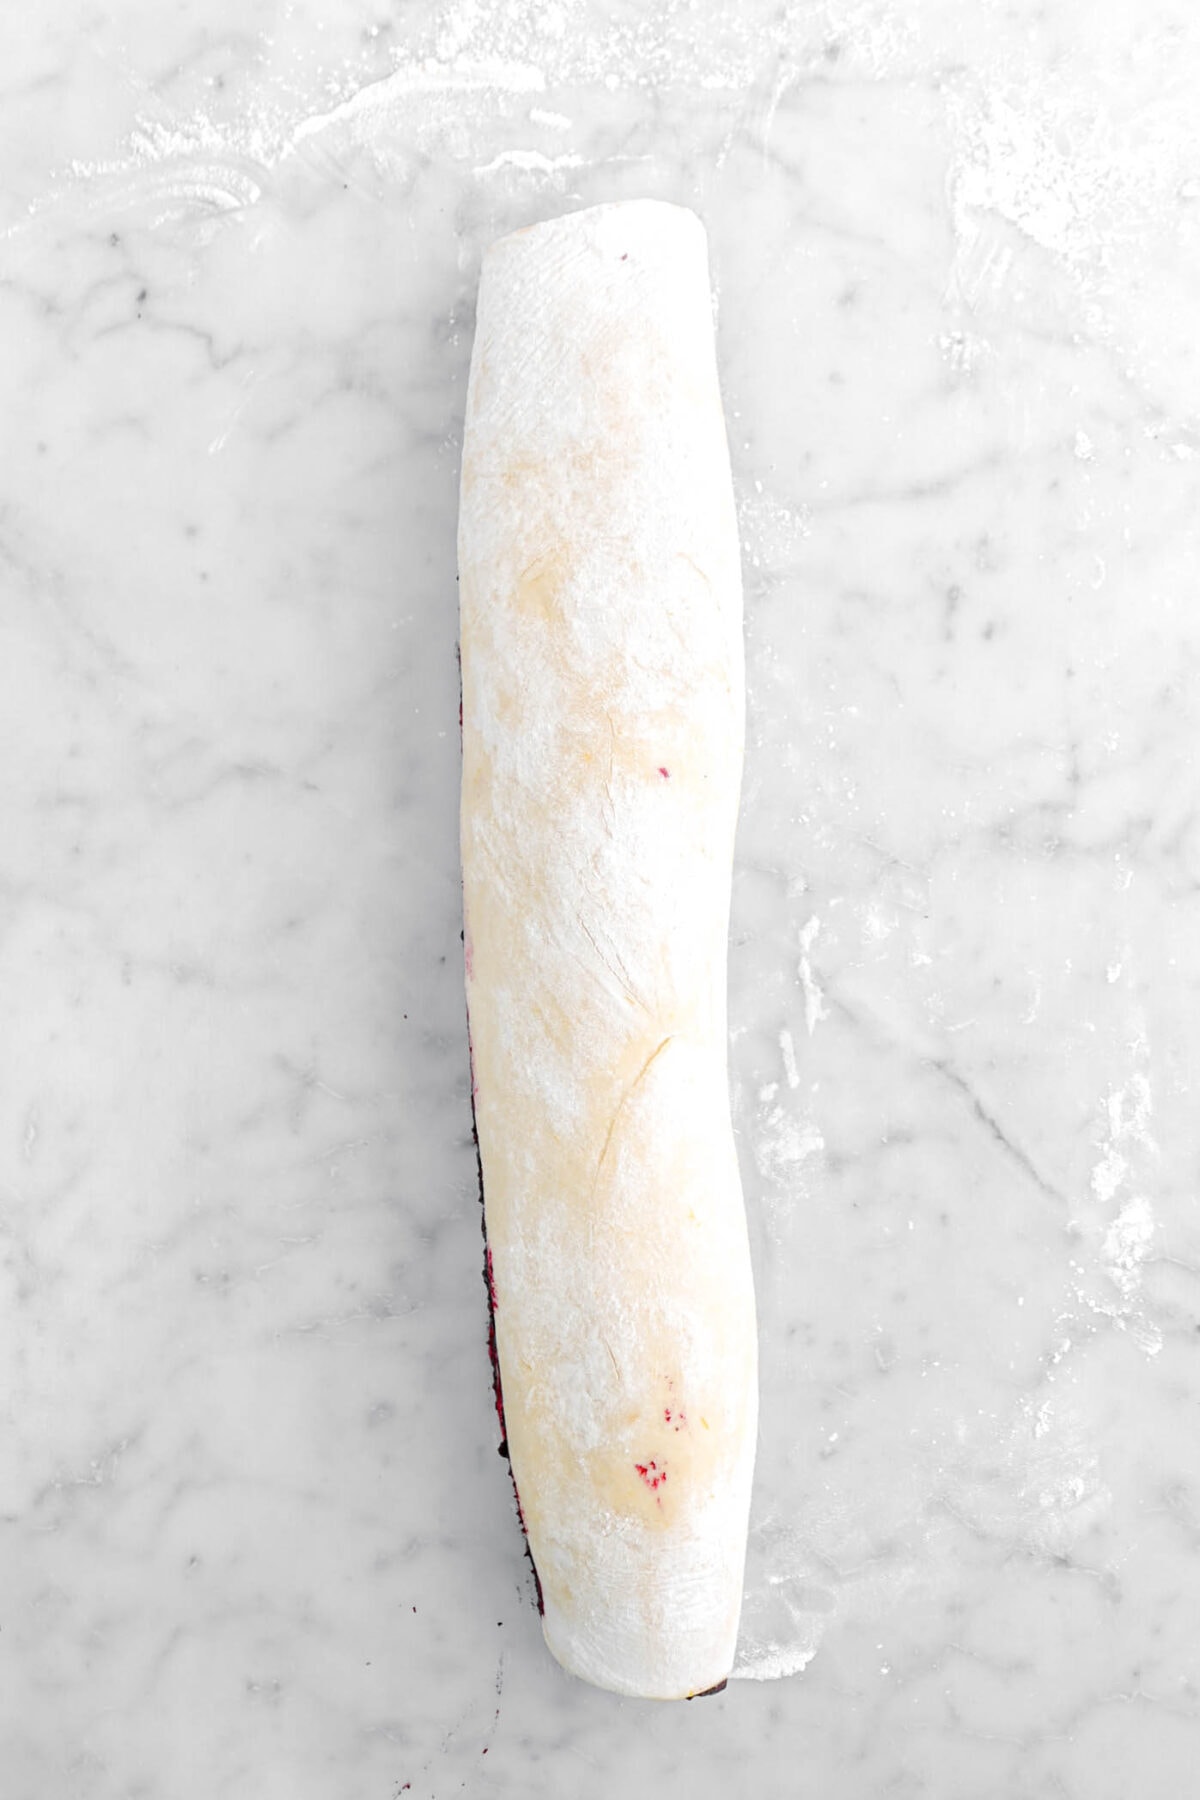 dough rolled into a log on marble surface.